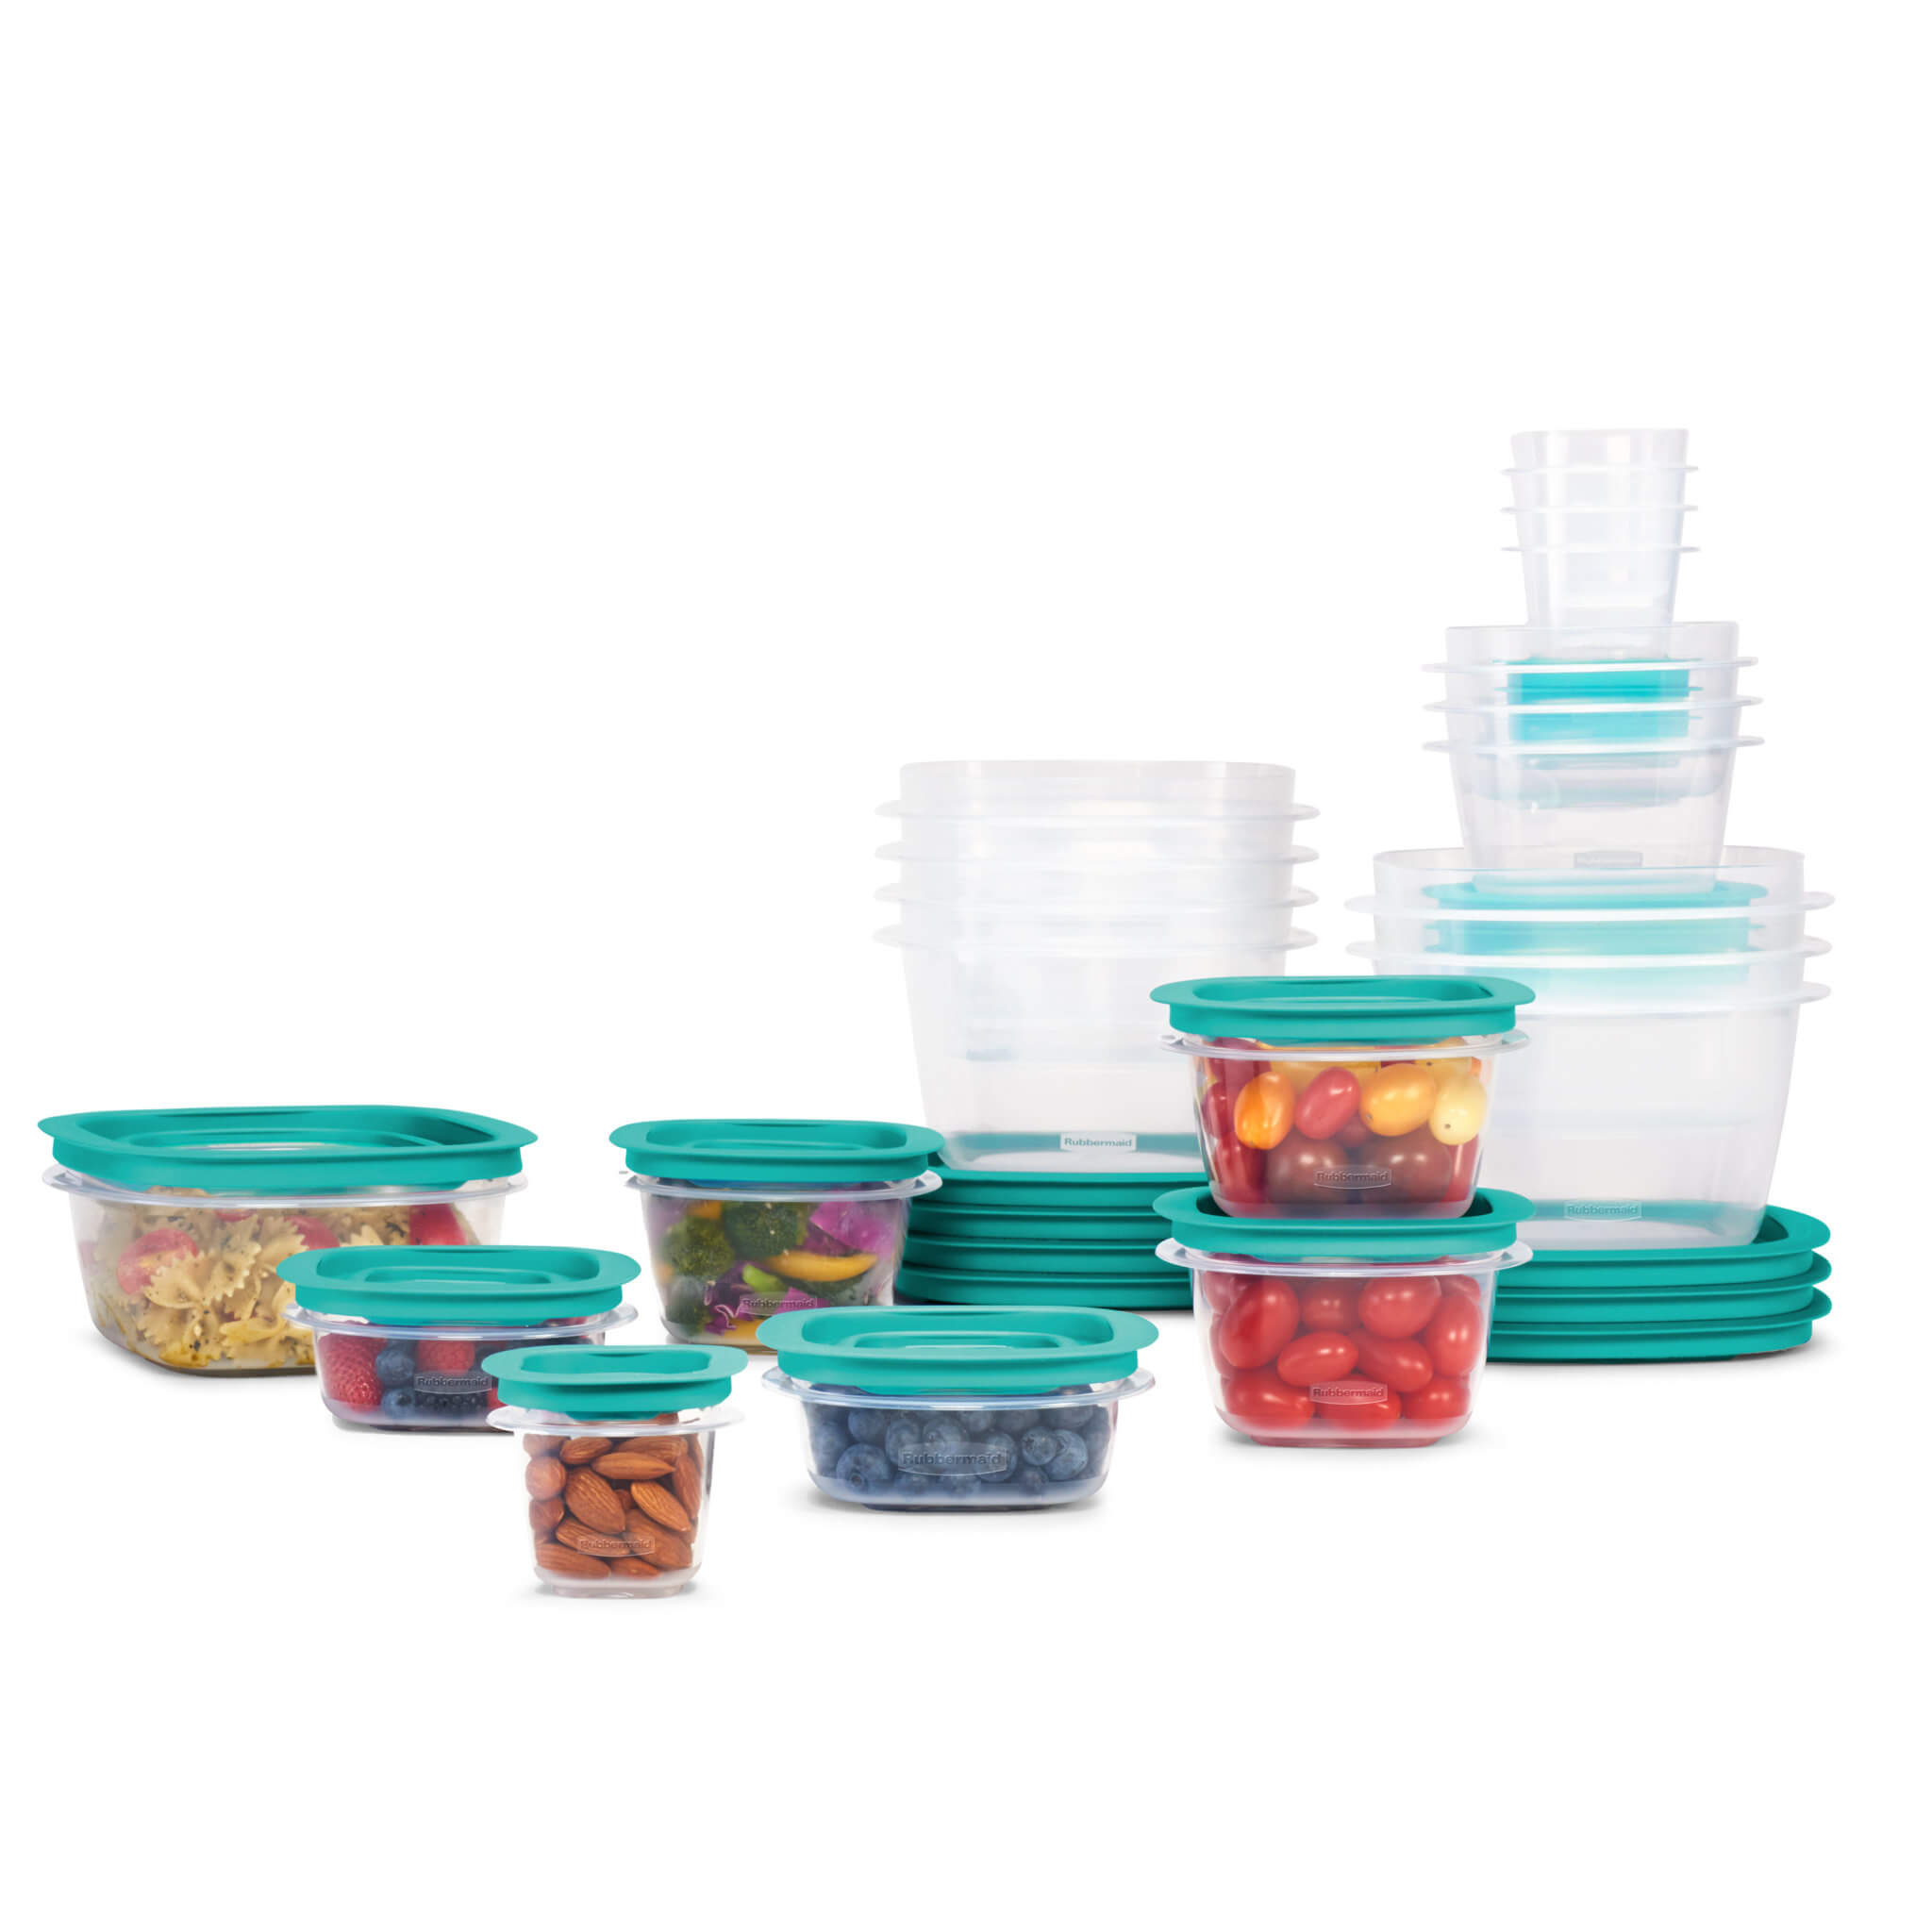 Rubbermaid Press & Lock Easy Find Lids Food Storage Containers, 42-Piece Set ONLY $17.99 (Reg $40)